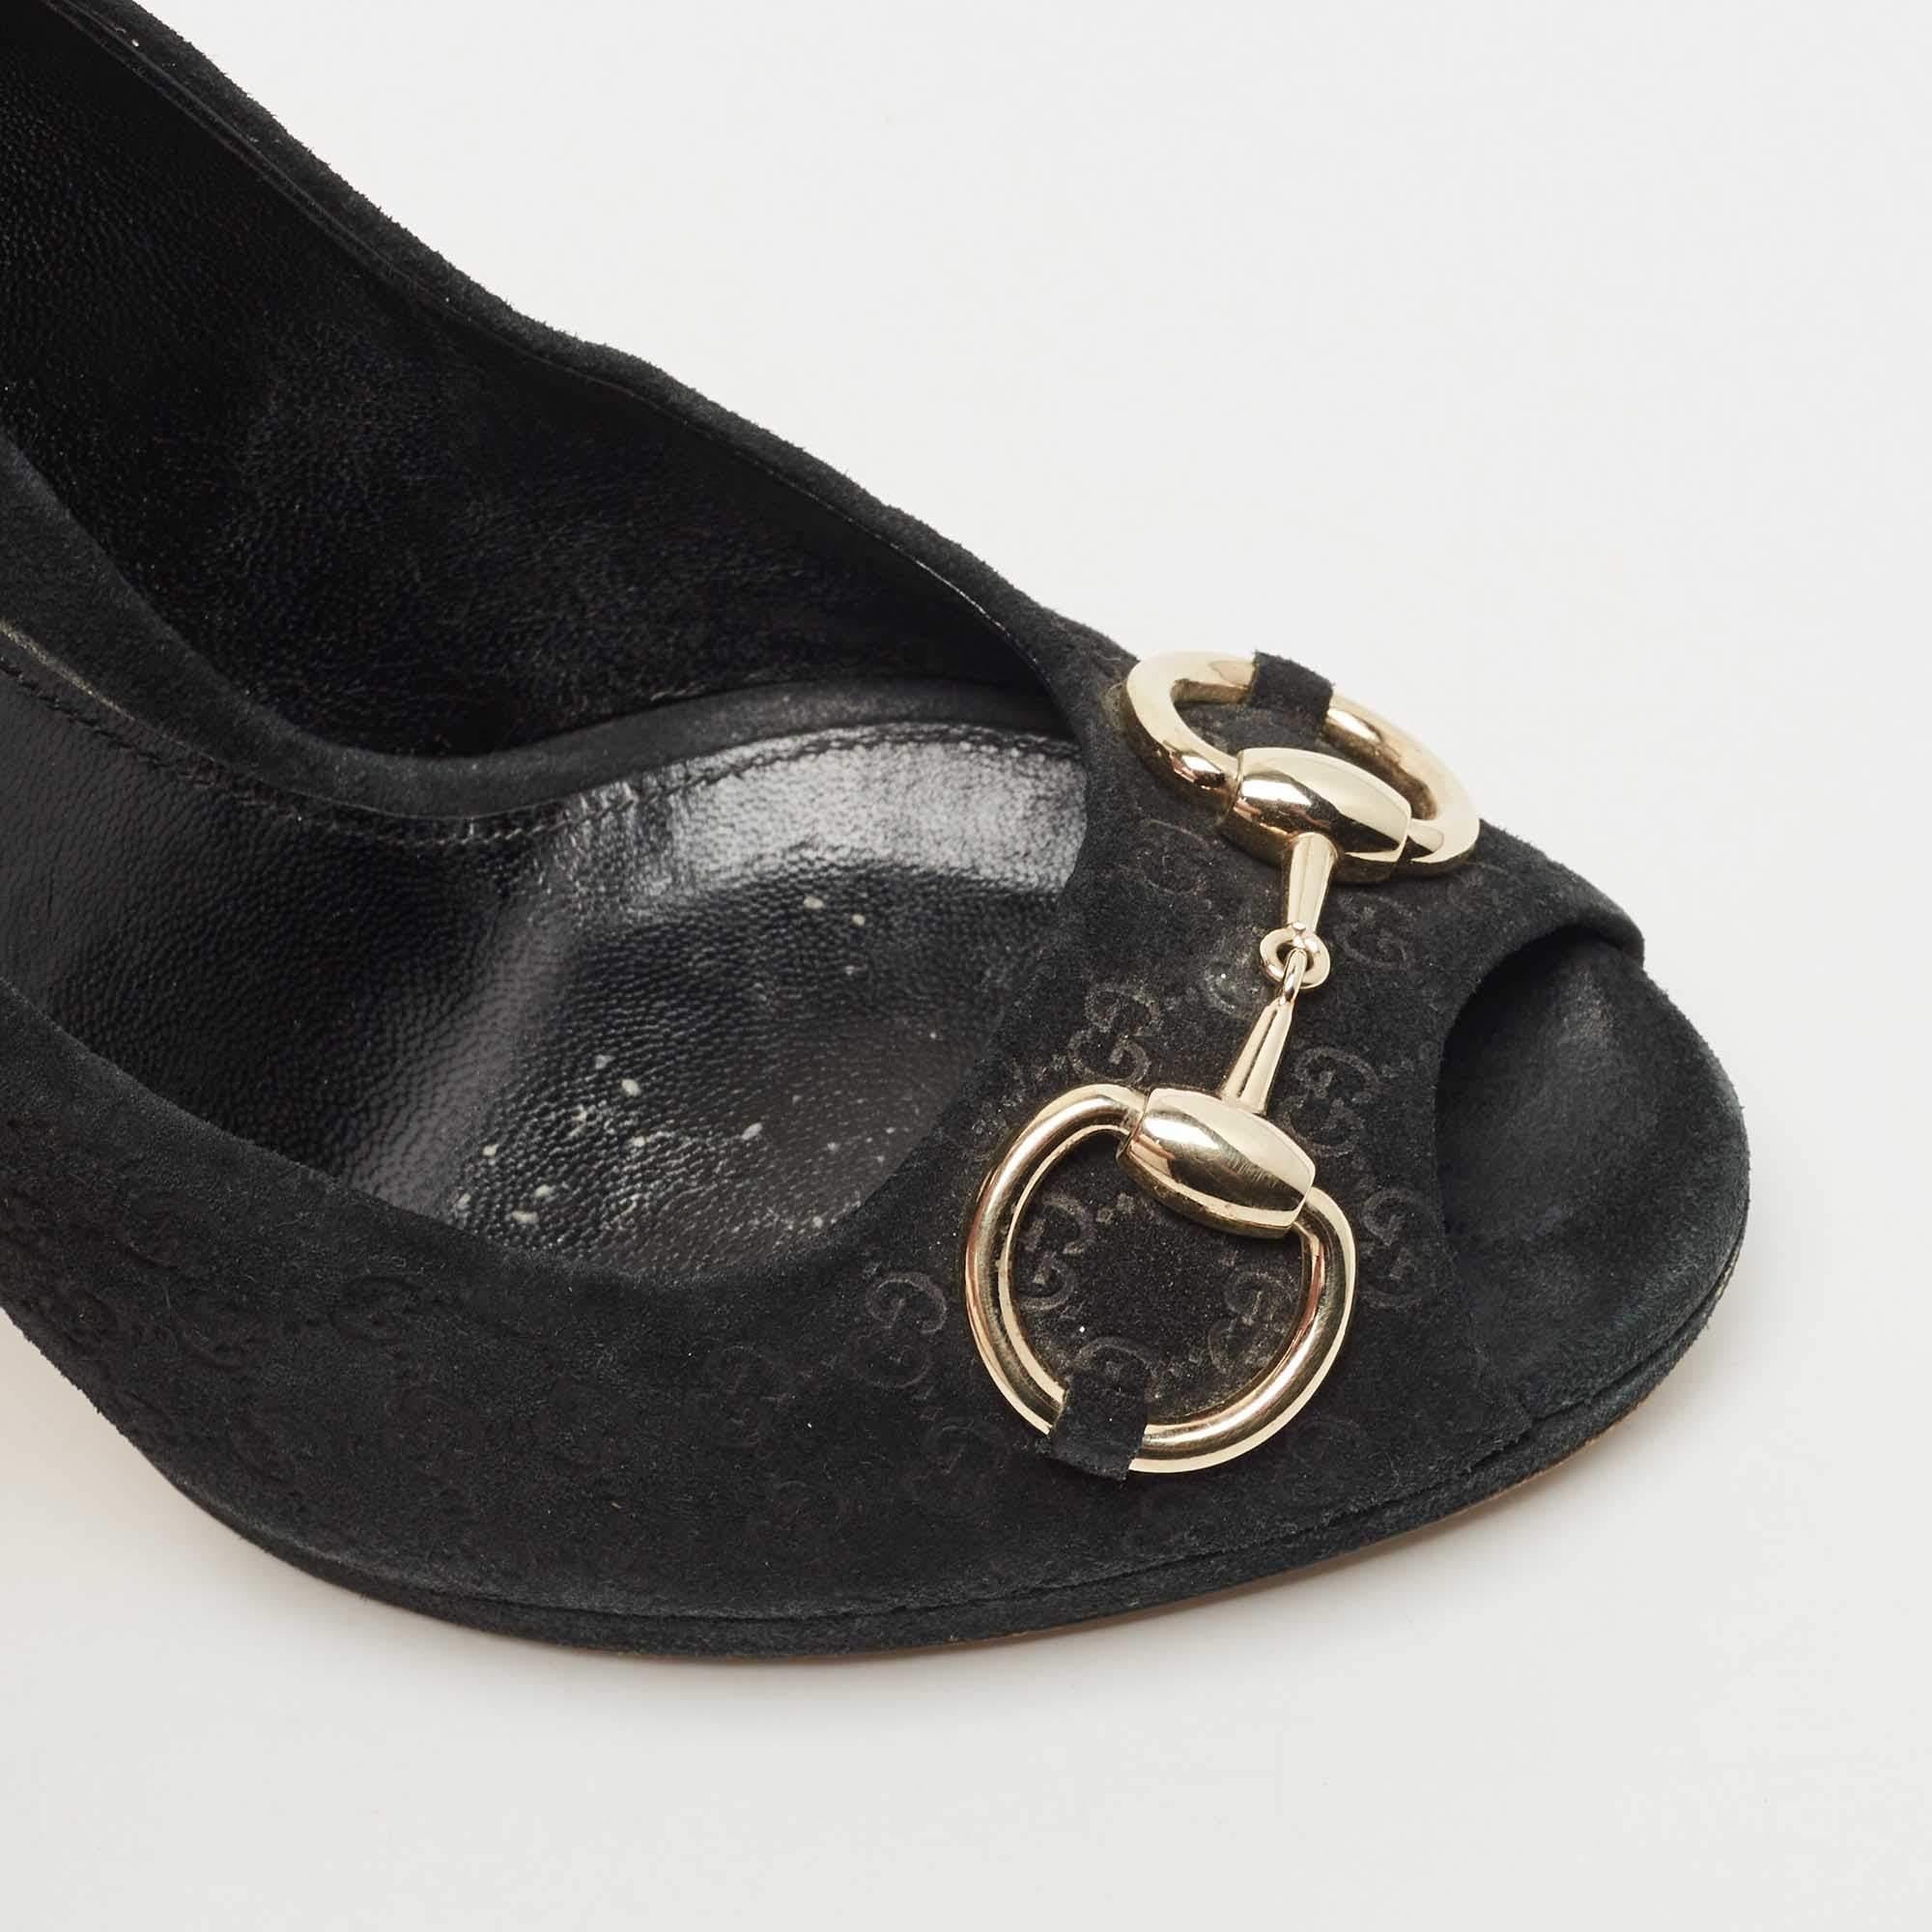 Gucci Black Suede Hollywood Peep Toe Pumps Size 38 For Sale 2